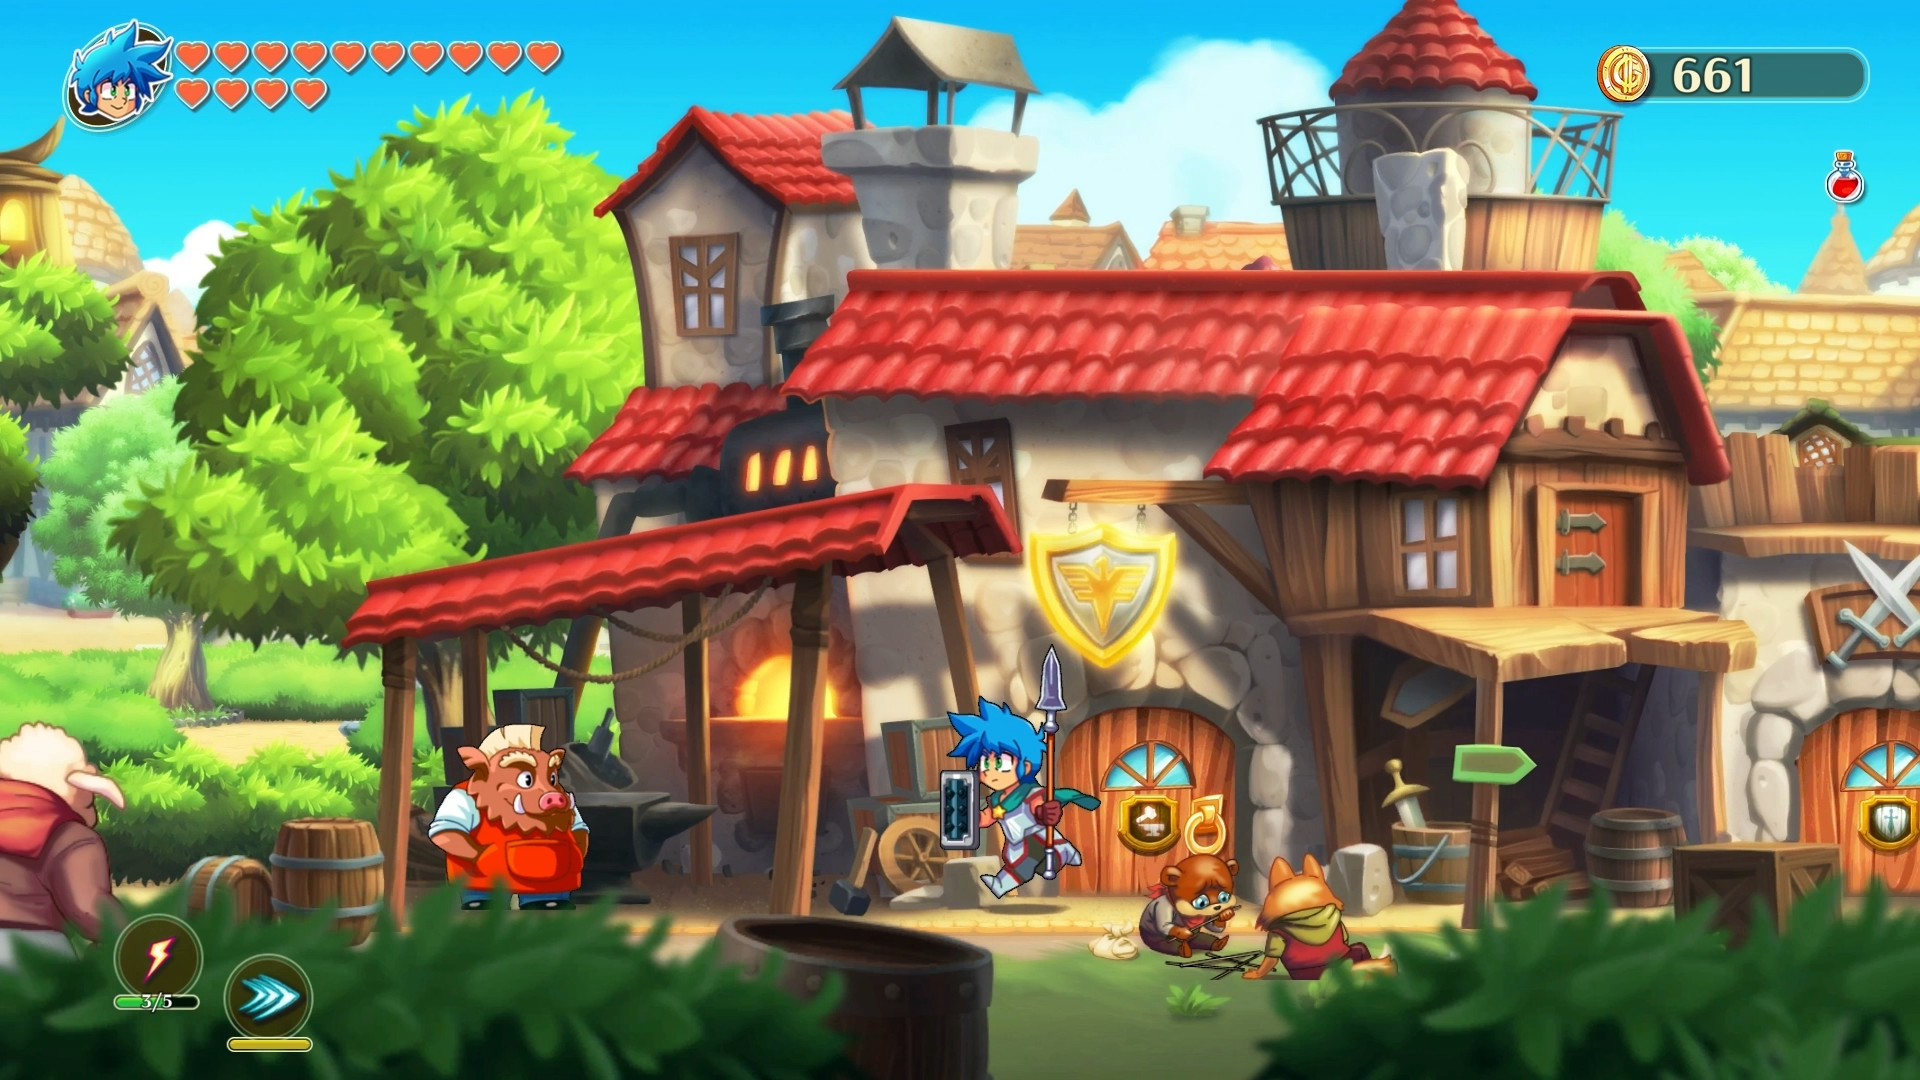 Download Monster Boy and the Cursed Kingdom para pc via torrent